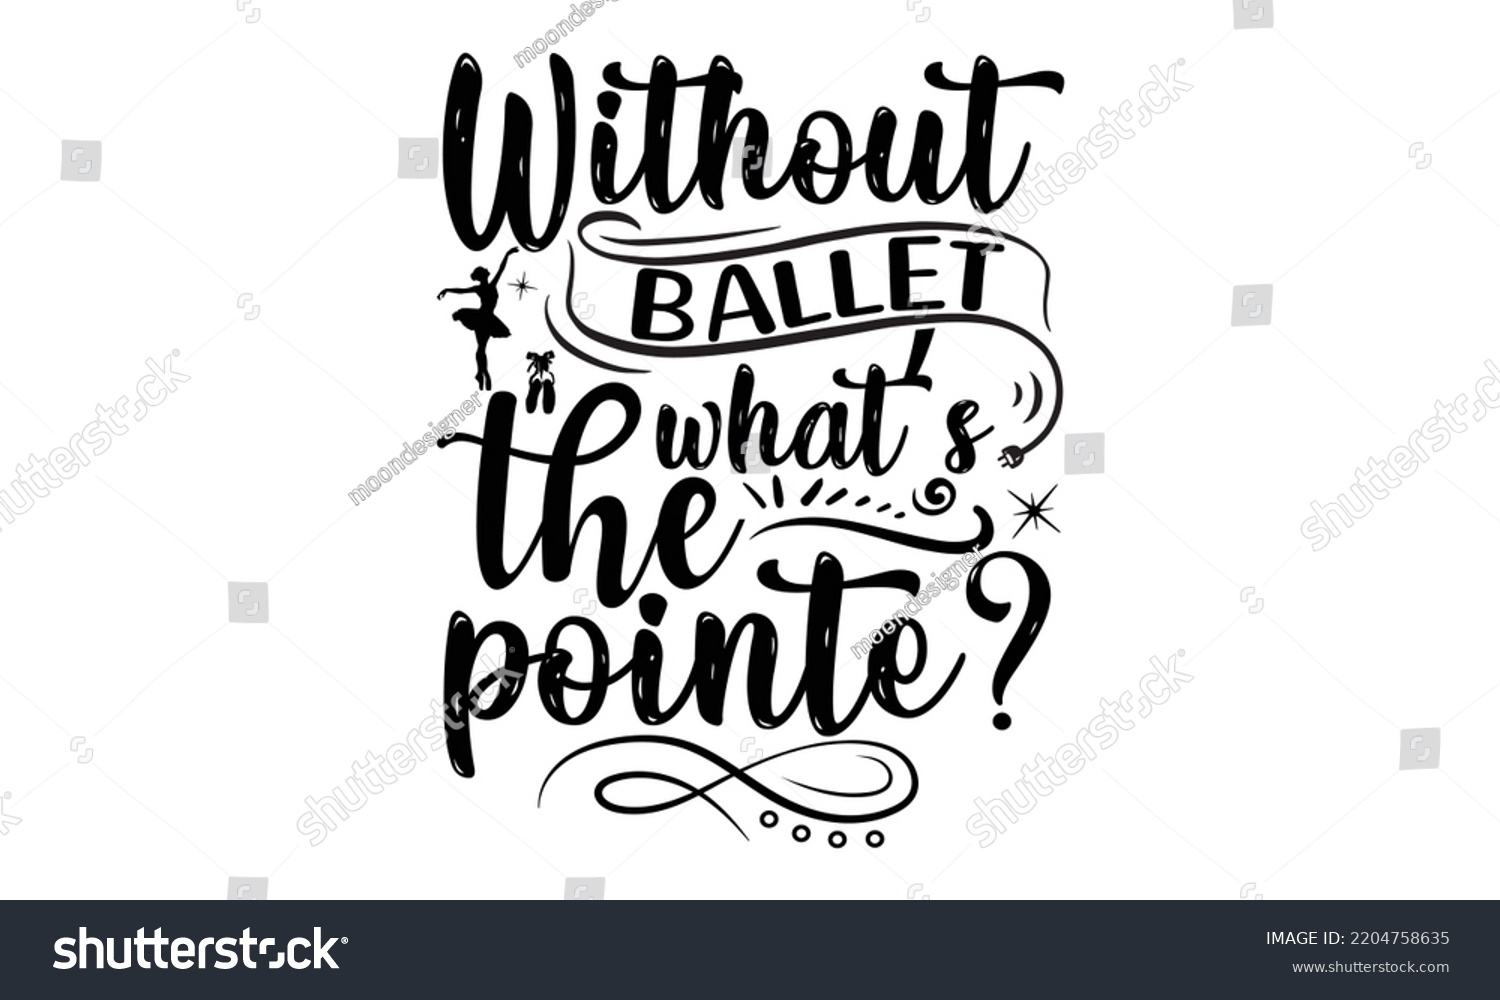 SVG of Without ballet what’s the pointe - Ballet svg t shirt design, ballet SVG Cut Files, Girl Ballet Design, Hand drawn lettering phrase and vector sign, EPS 10 svg